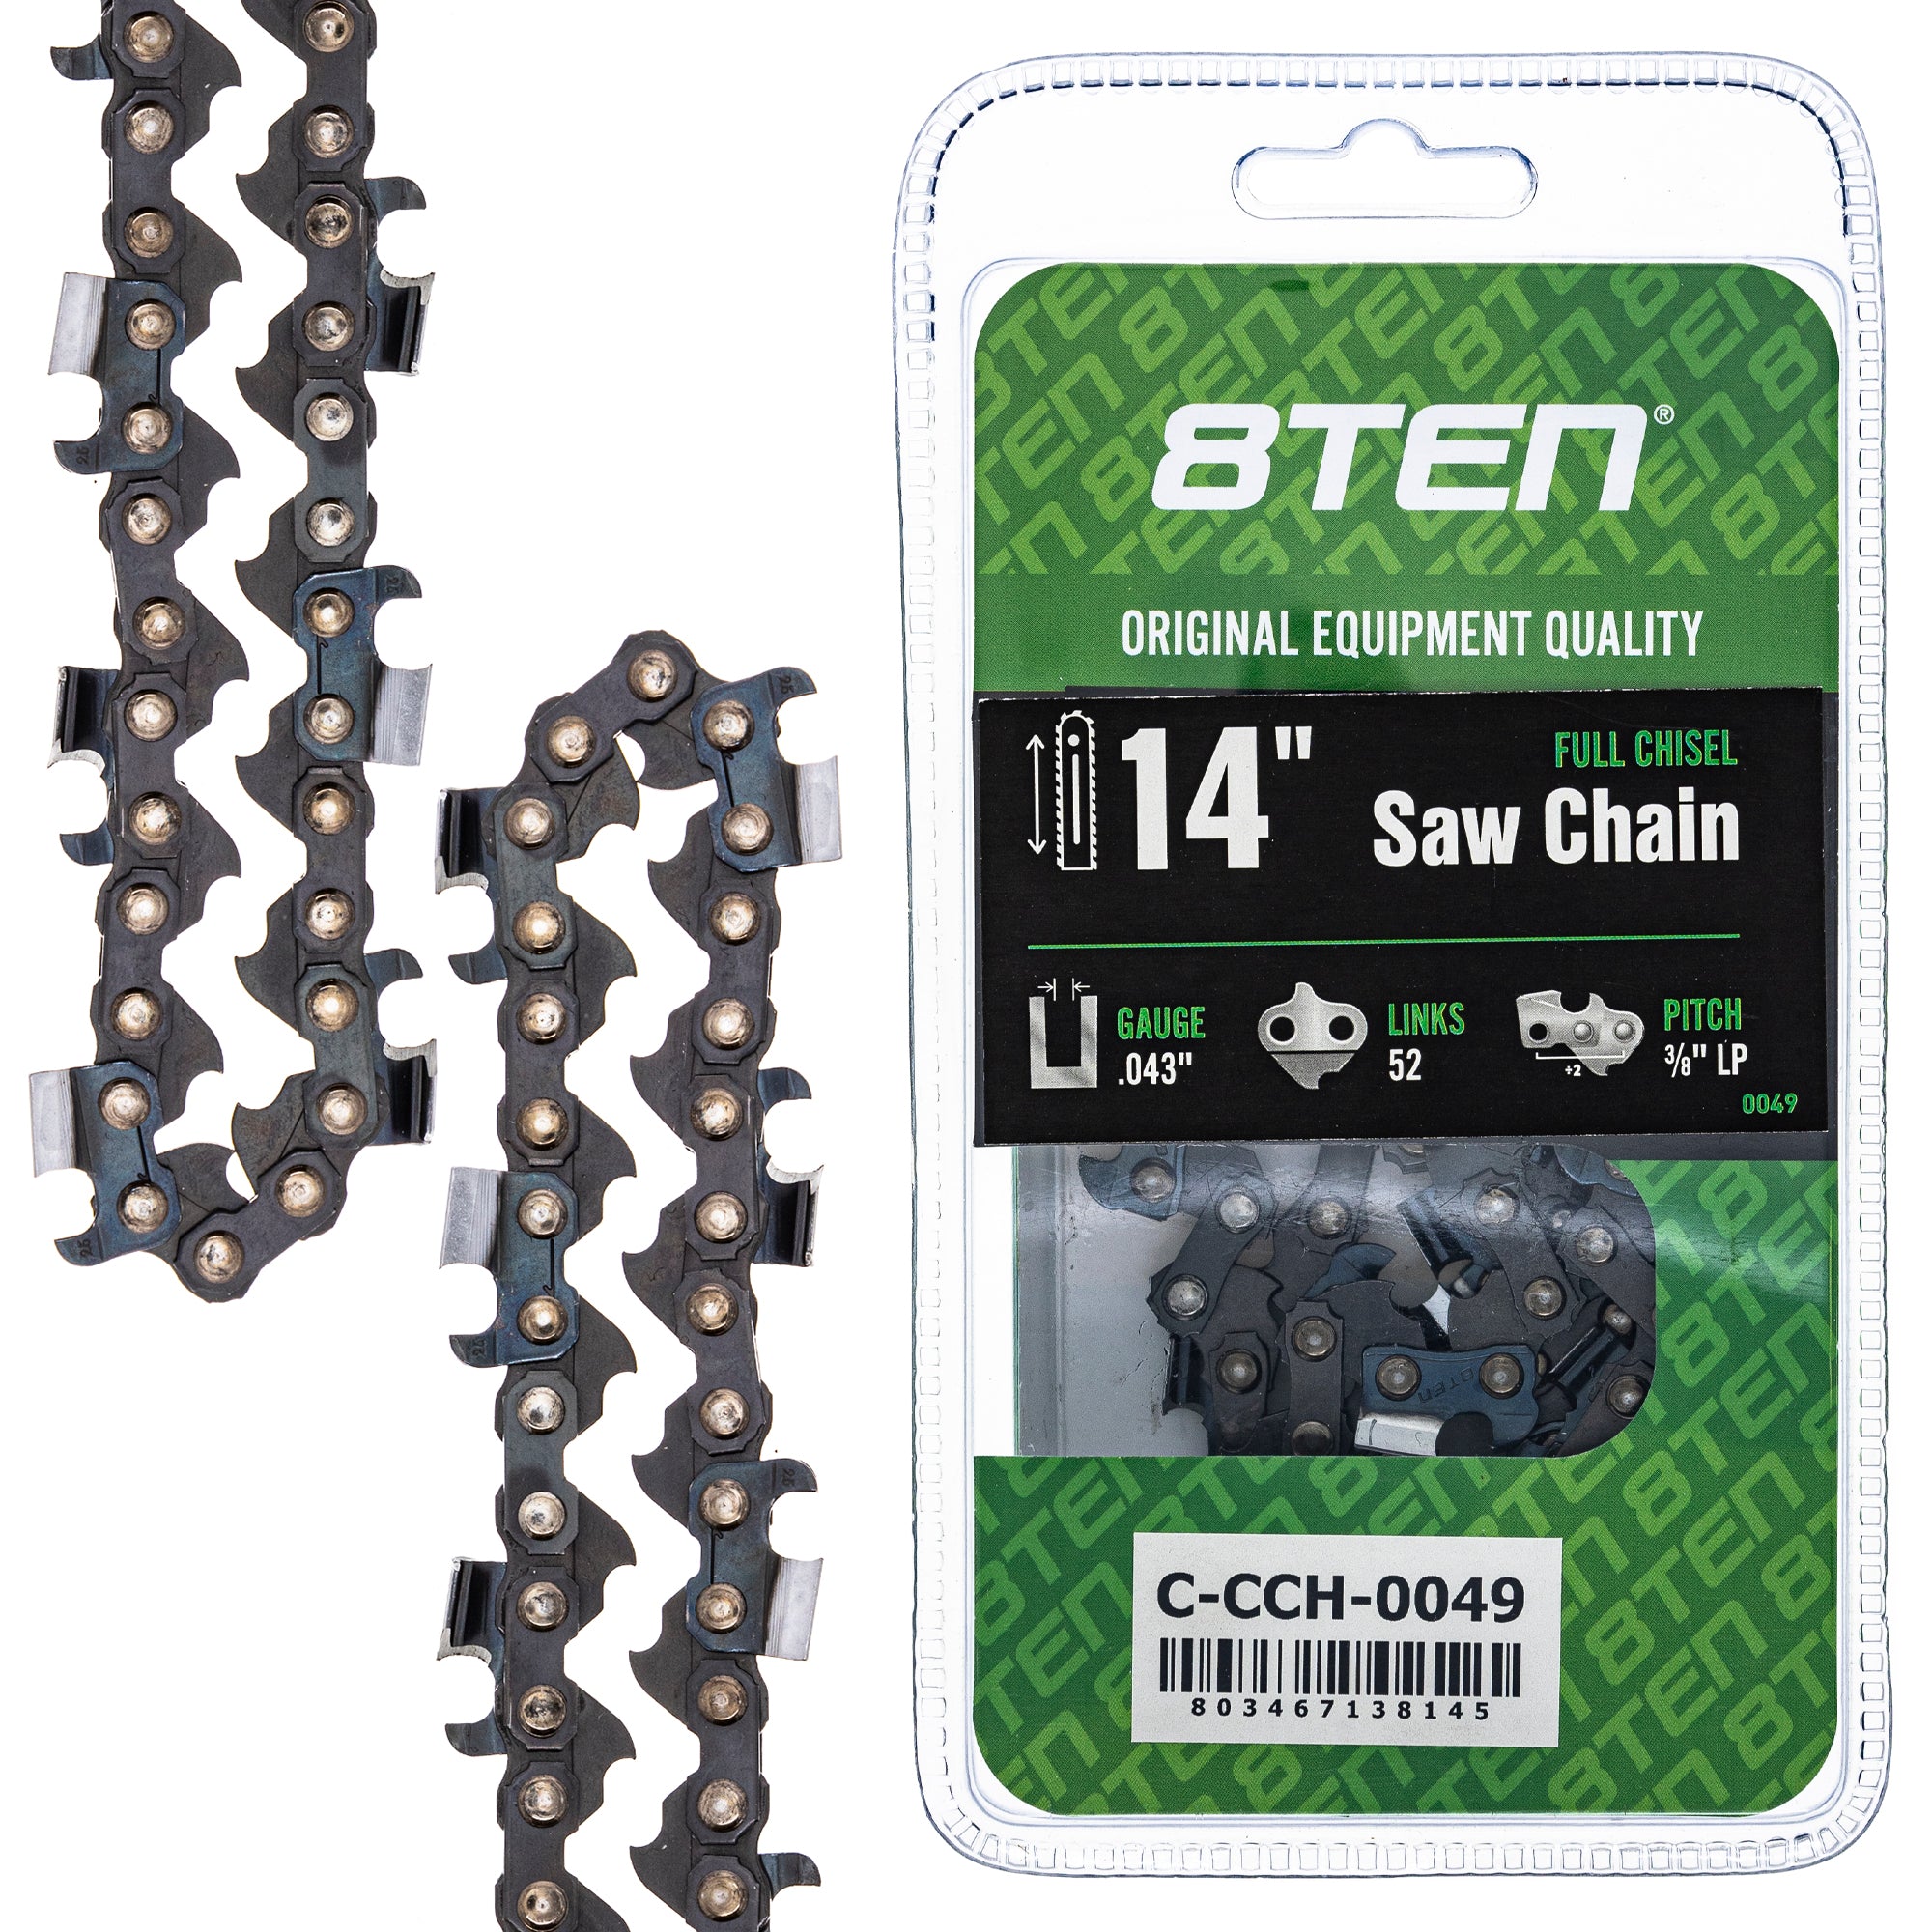 Chainsaw Chain 14 Inch .043 3/8 LP 52DL for zOTHER Champion XCU04 XCU03 T536 EA3501S 8TEN 810-CCC2261H